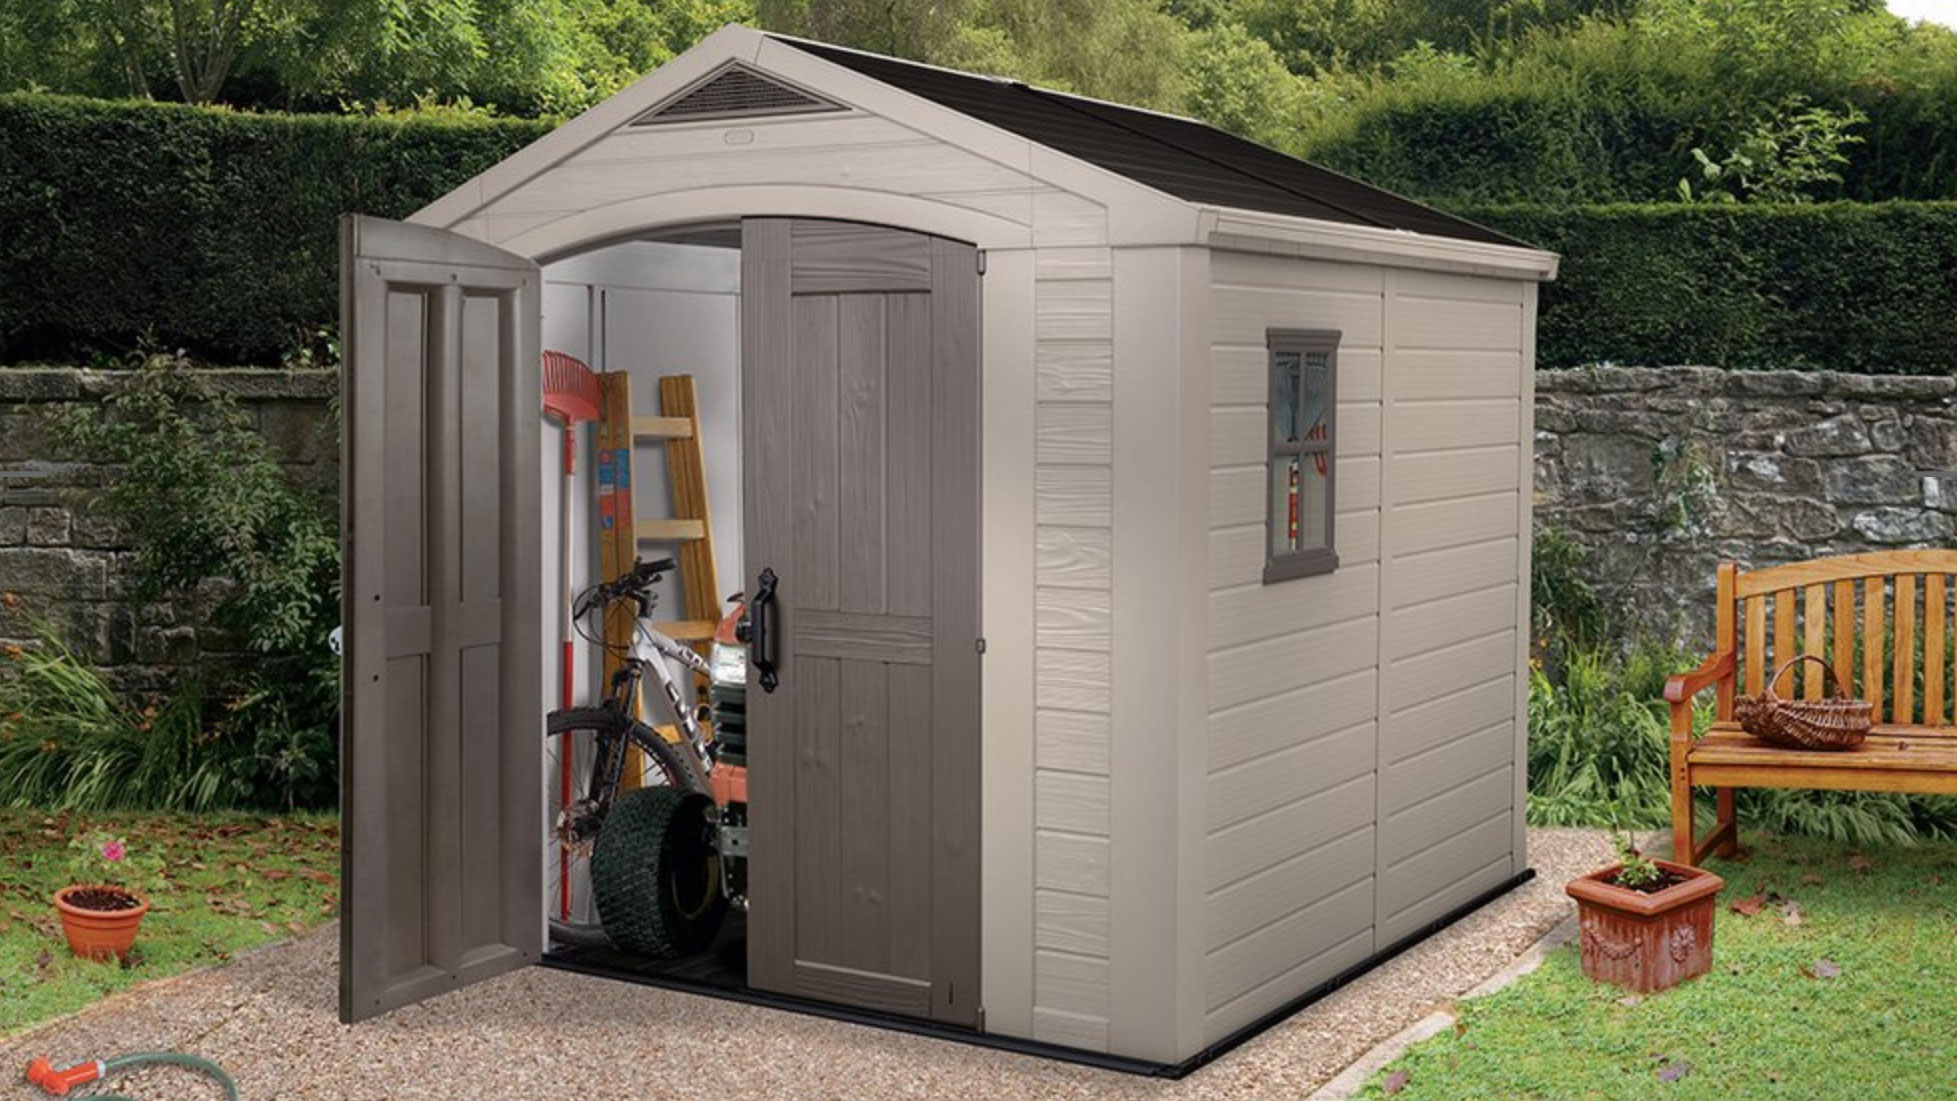 Best garden shed: 8 top buys for storage or garden office space | Real